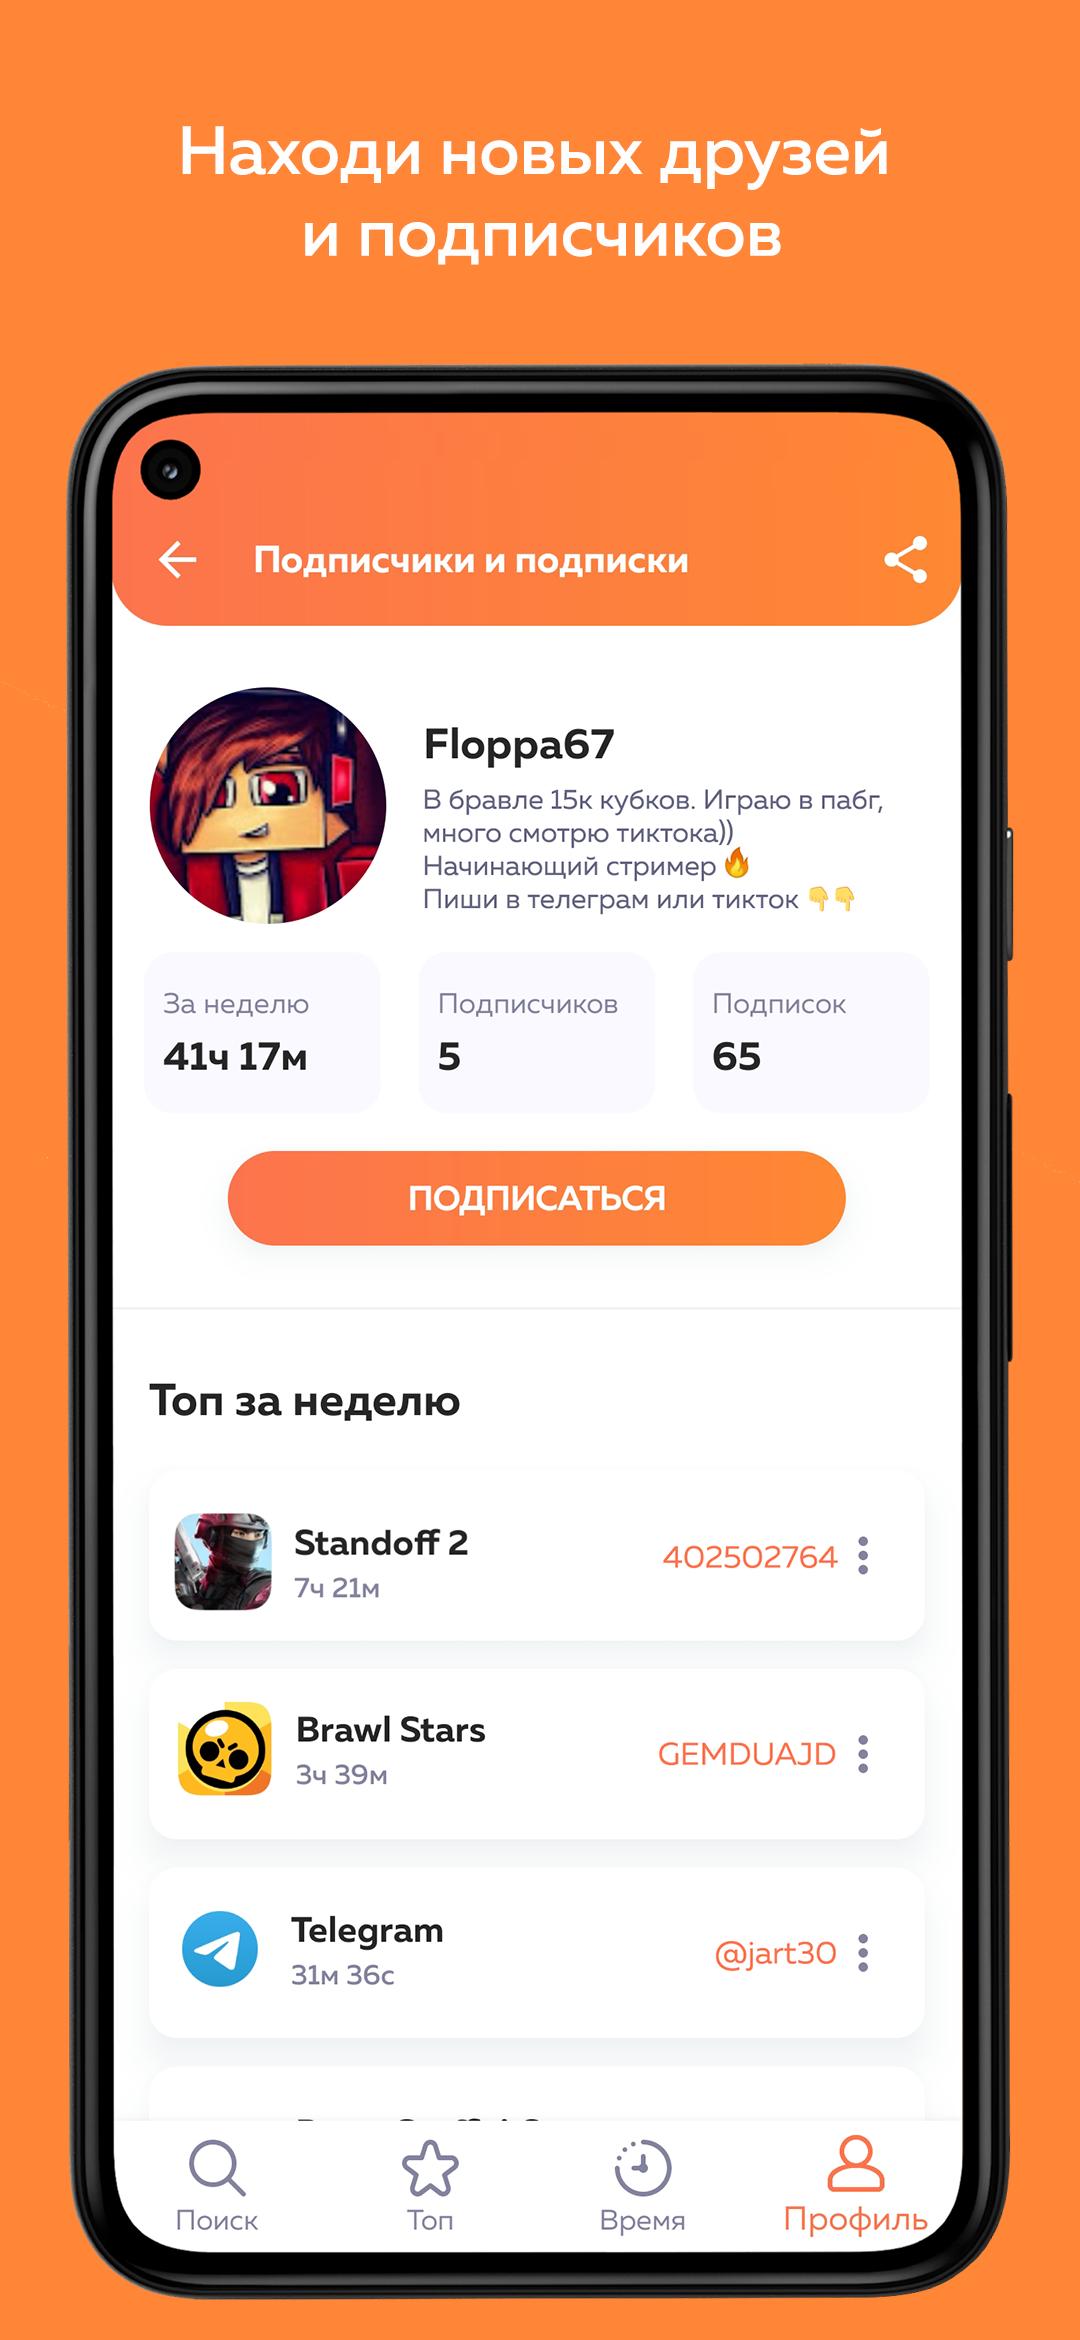 Https my apps com. My apps time Скриншоты. My apps time рекорд. My apps time время. My apps time 2 часа.